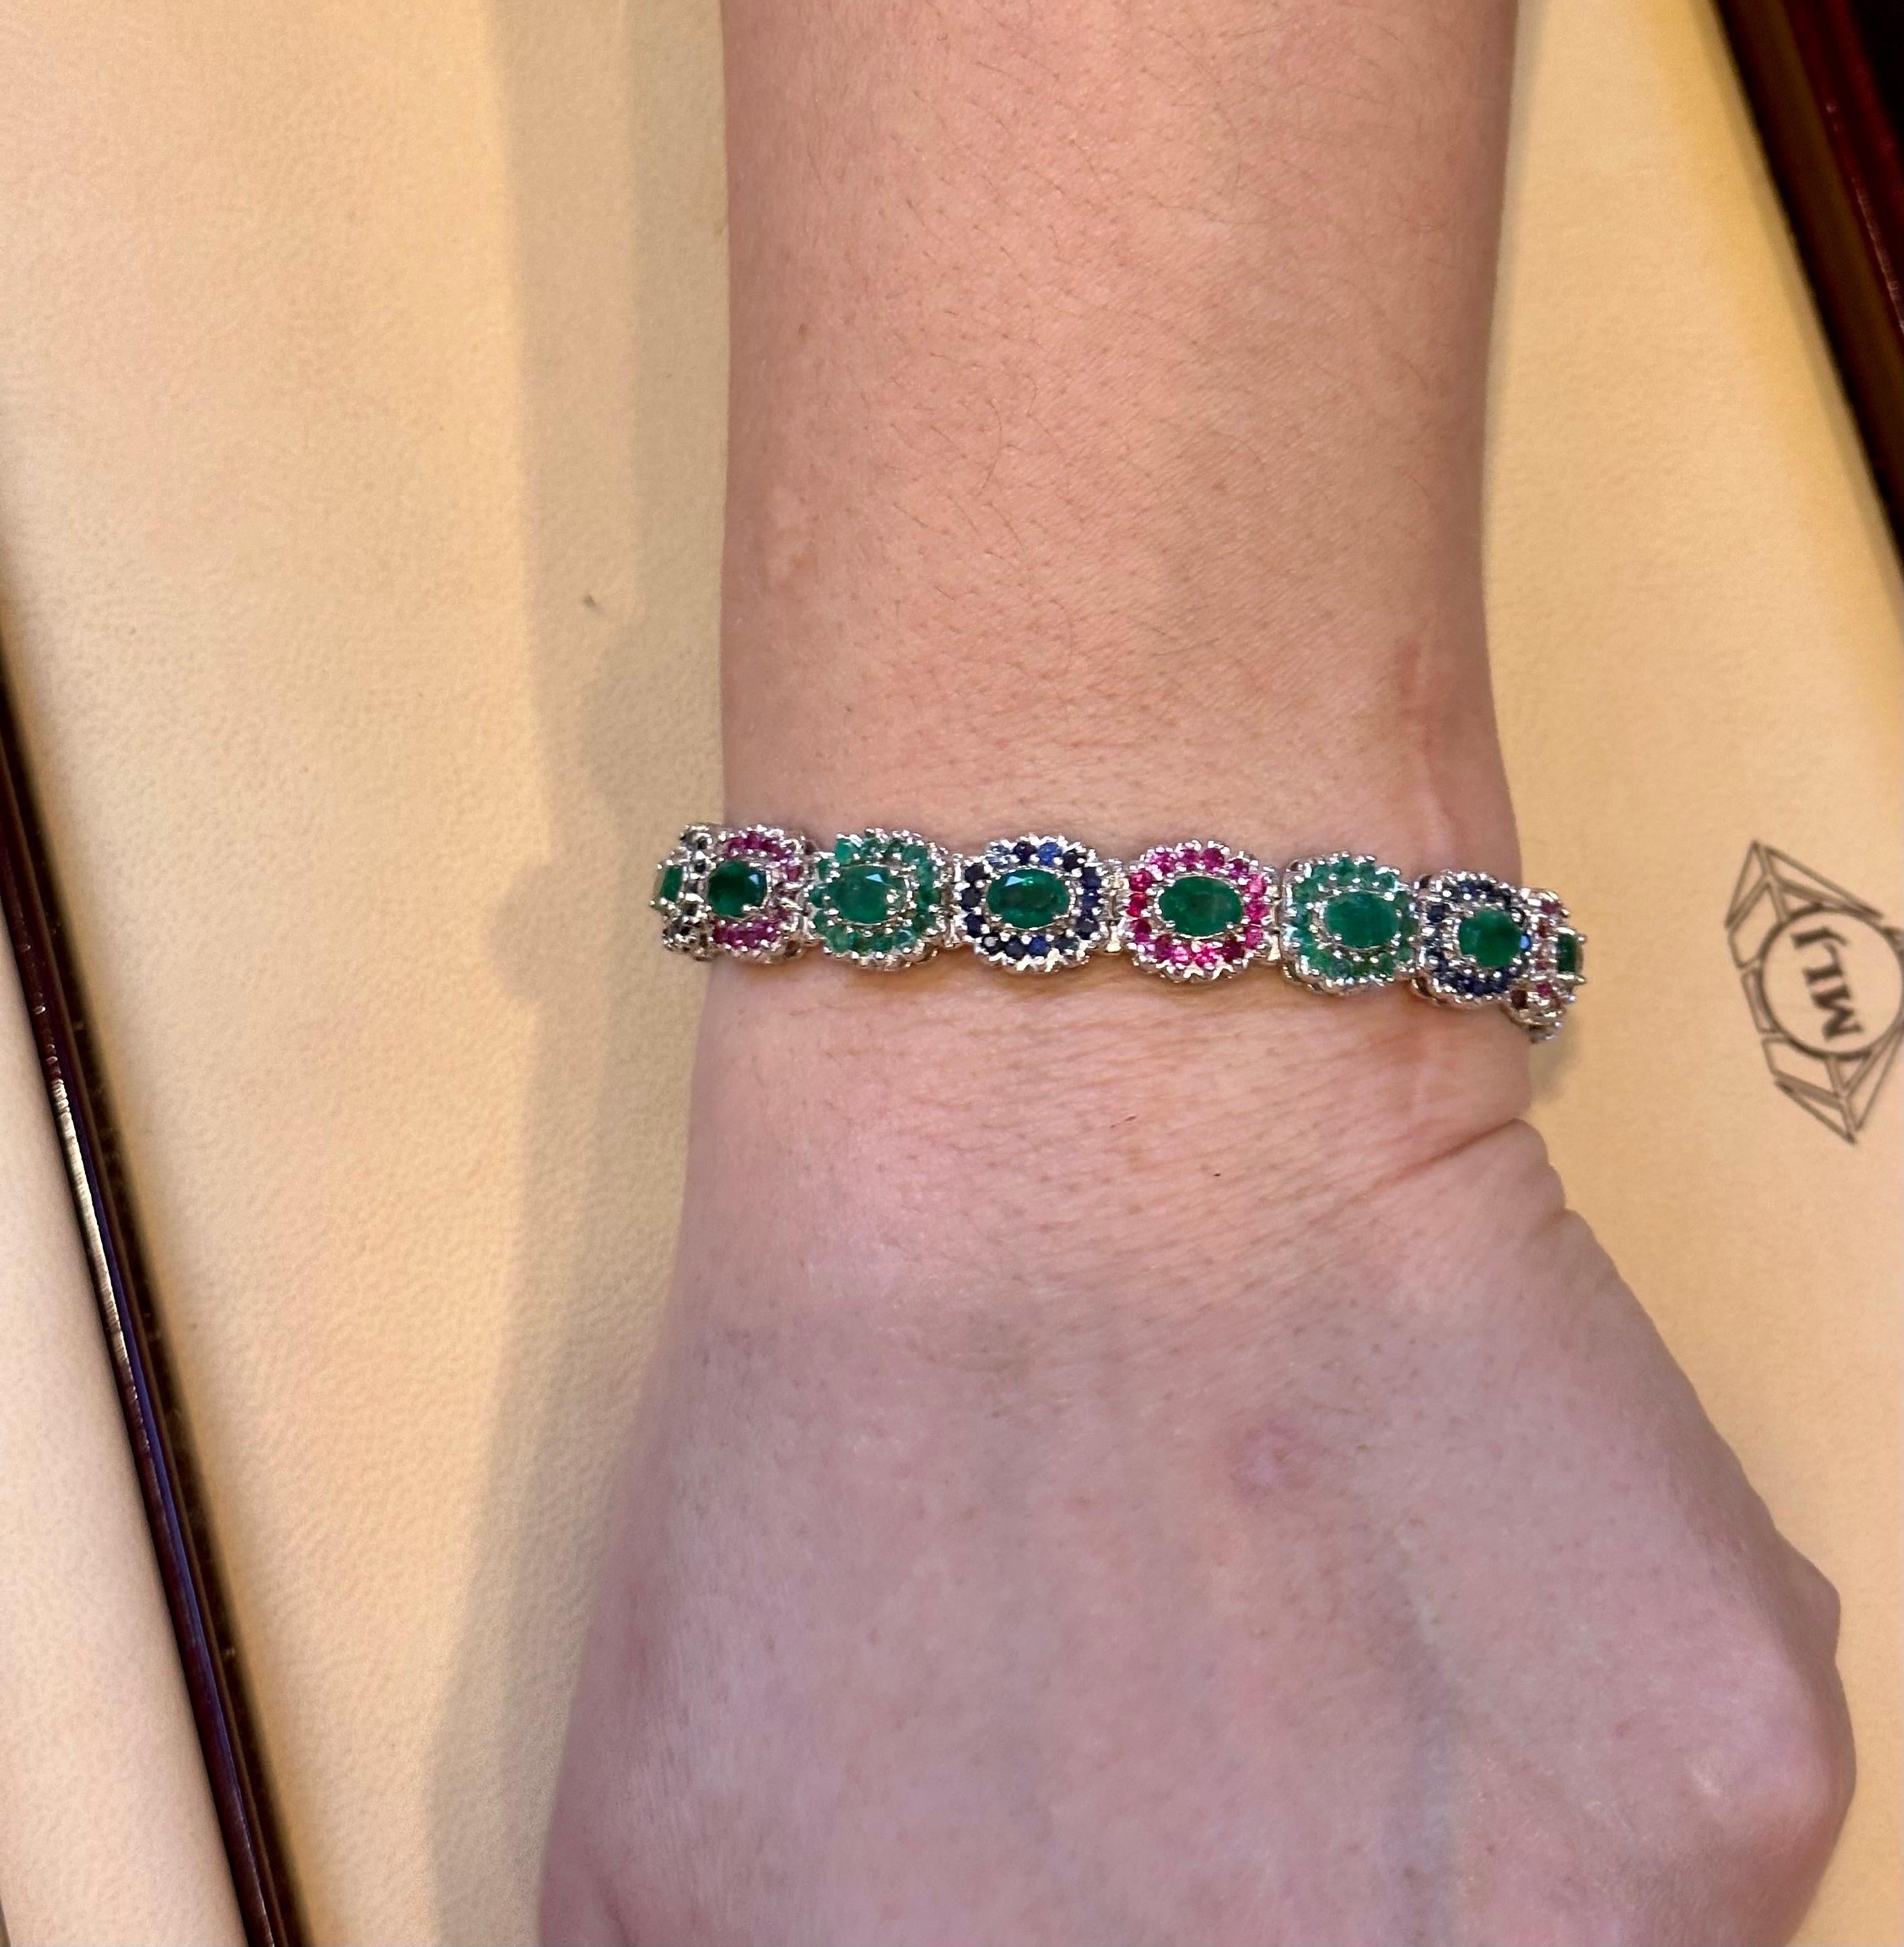 8 Ct Oval Cut Emerald & Ruby & Sapphire Tennis Bracelet 14 Kt White Gold 25.5Gm For Sale 4